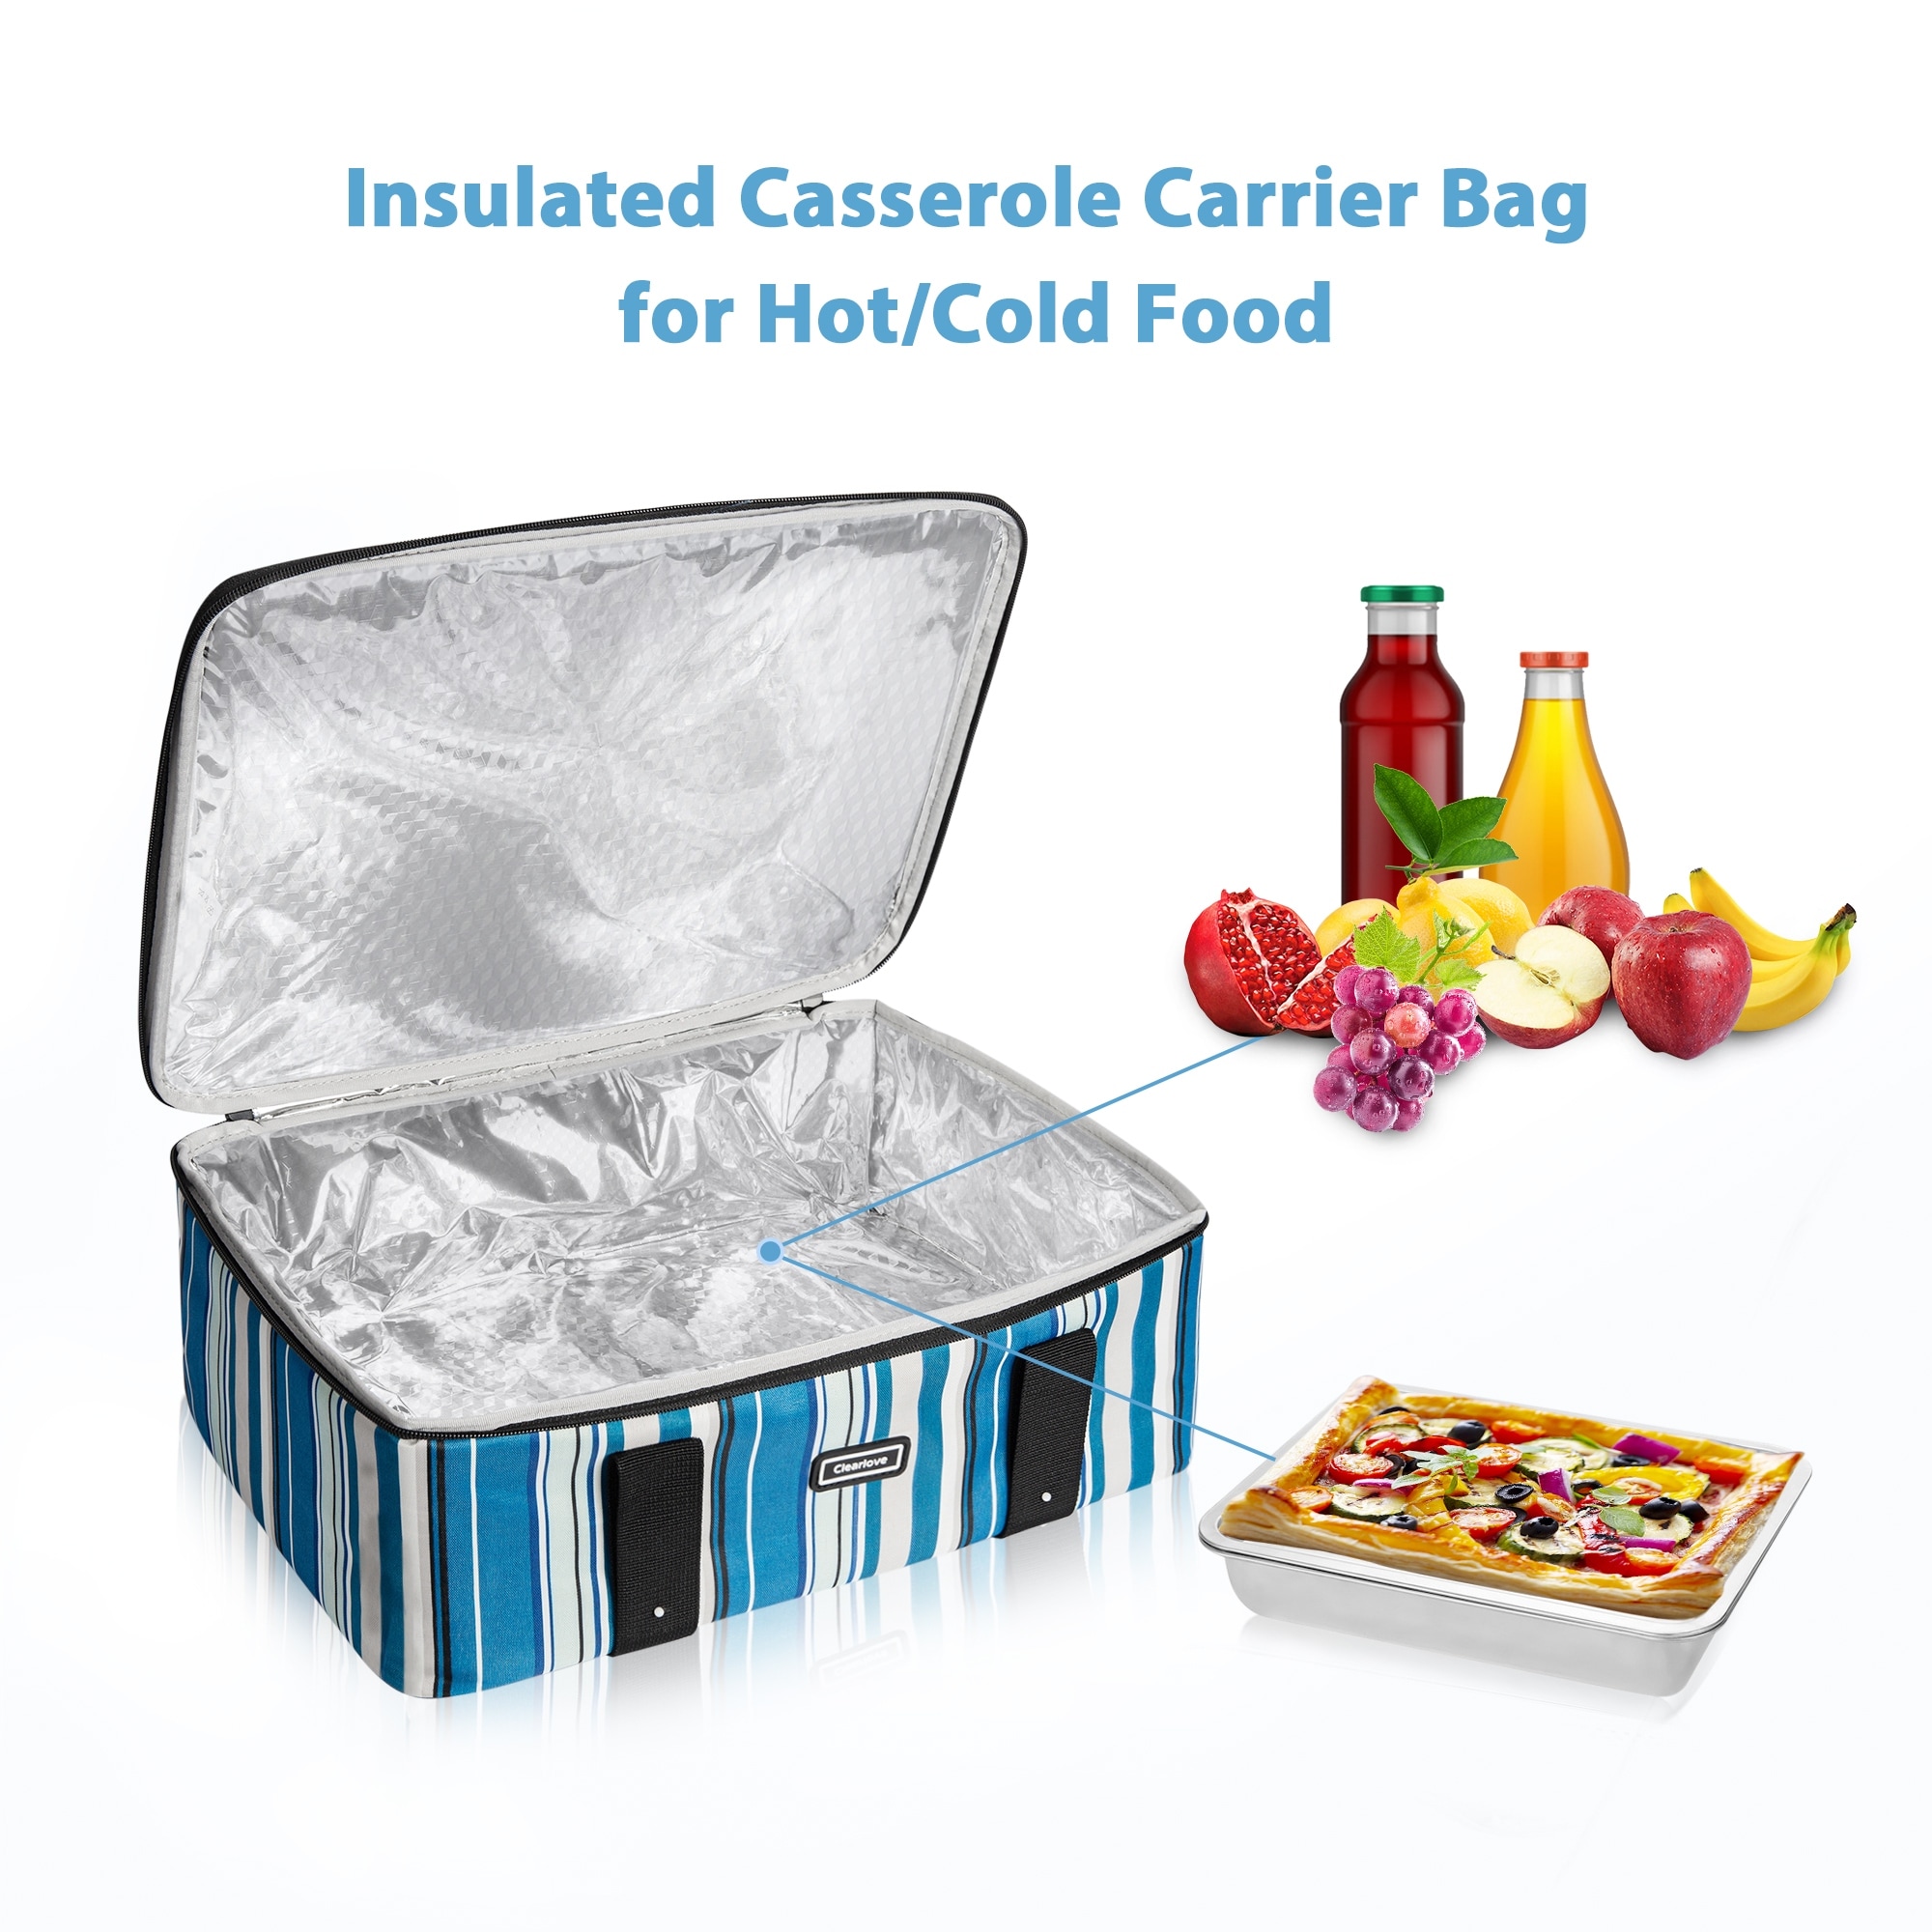 https://ak1.ostkcdn.com/images/products/is/images/direct/79bfe3962b92b7b65b08895e6ff22767b1378874/Insulated-Casserole-Carrier-Thermal-Lunch-Bag-for-Hot-Cold-Food.jpg